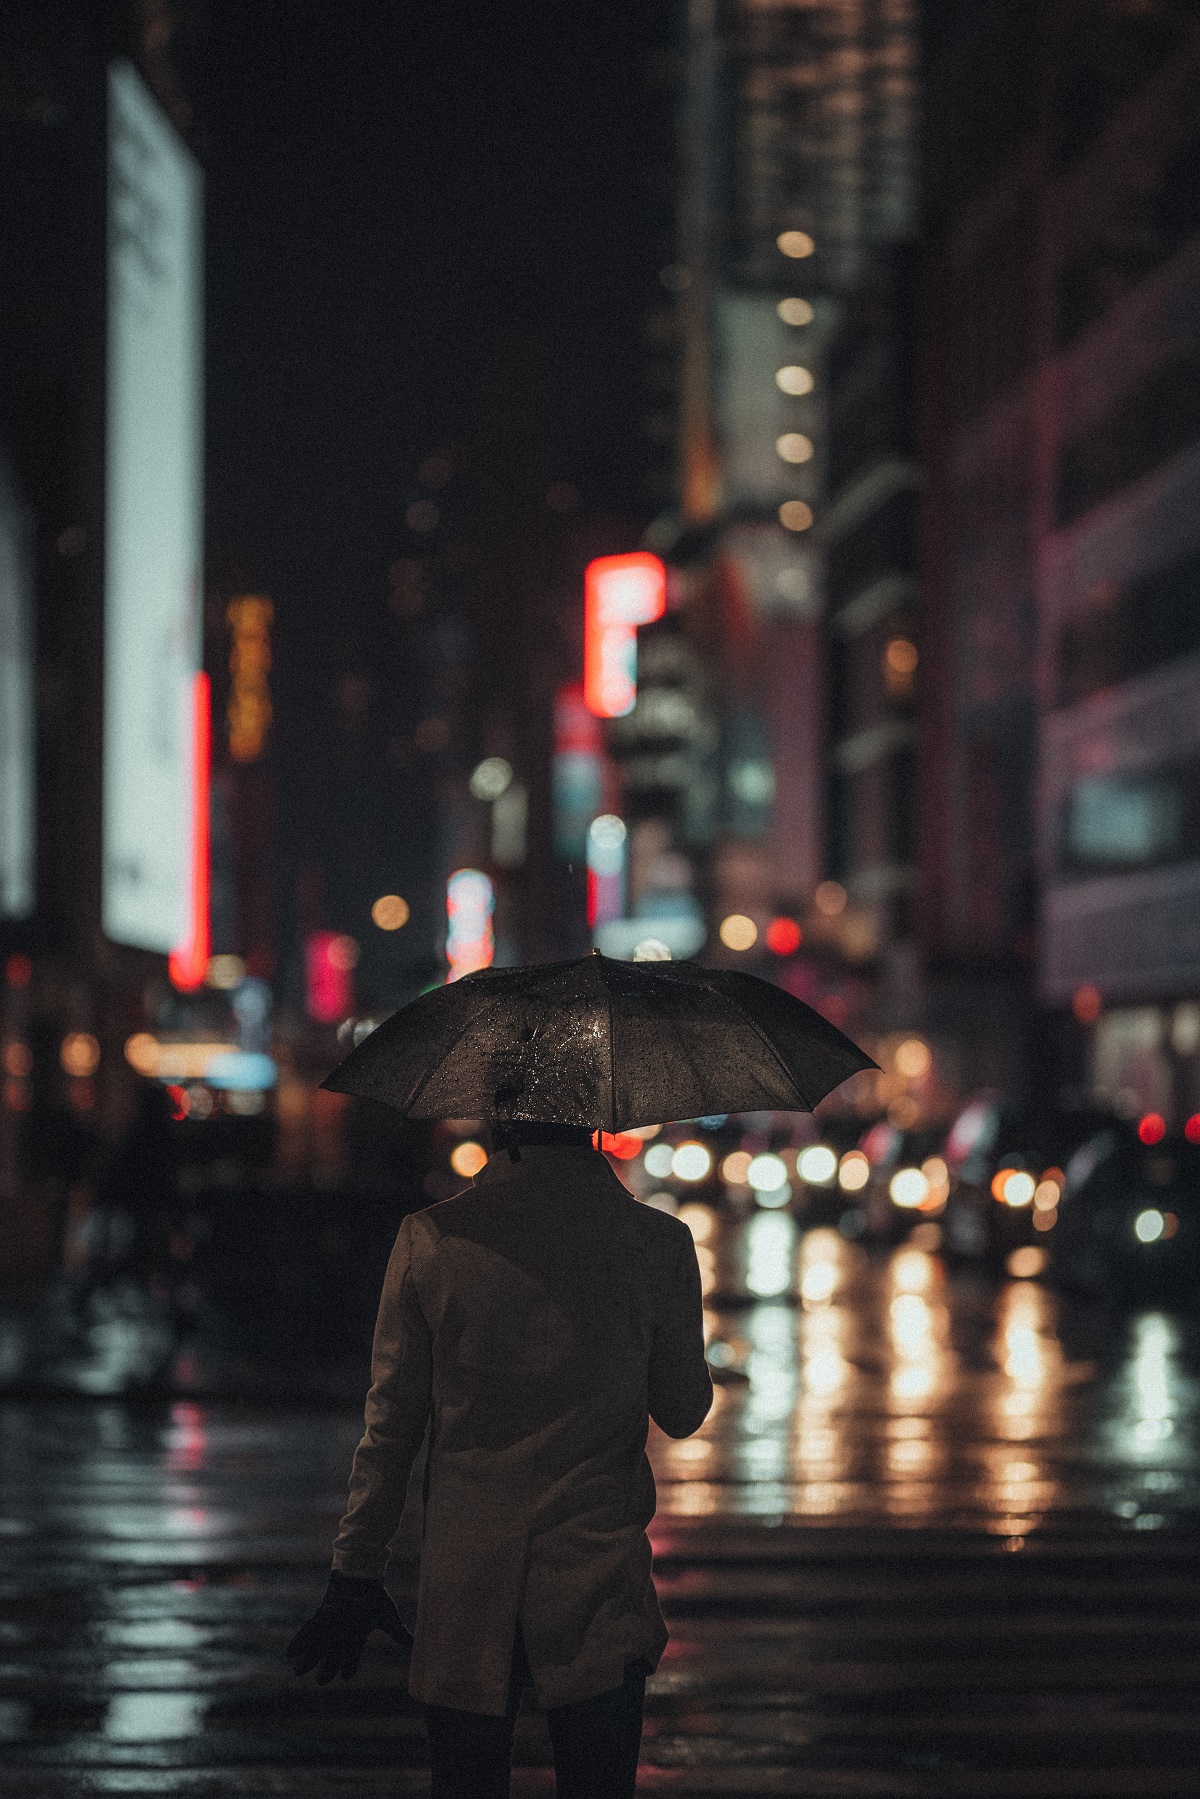 15 THINGS TO DO ON A RAINY DAY IN NYC!